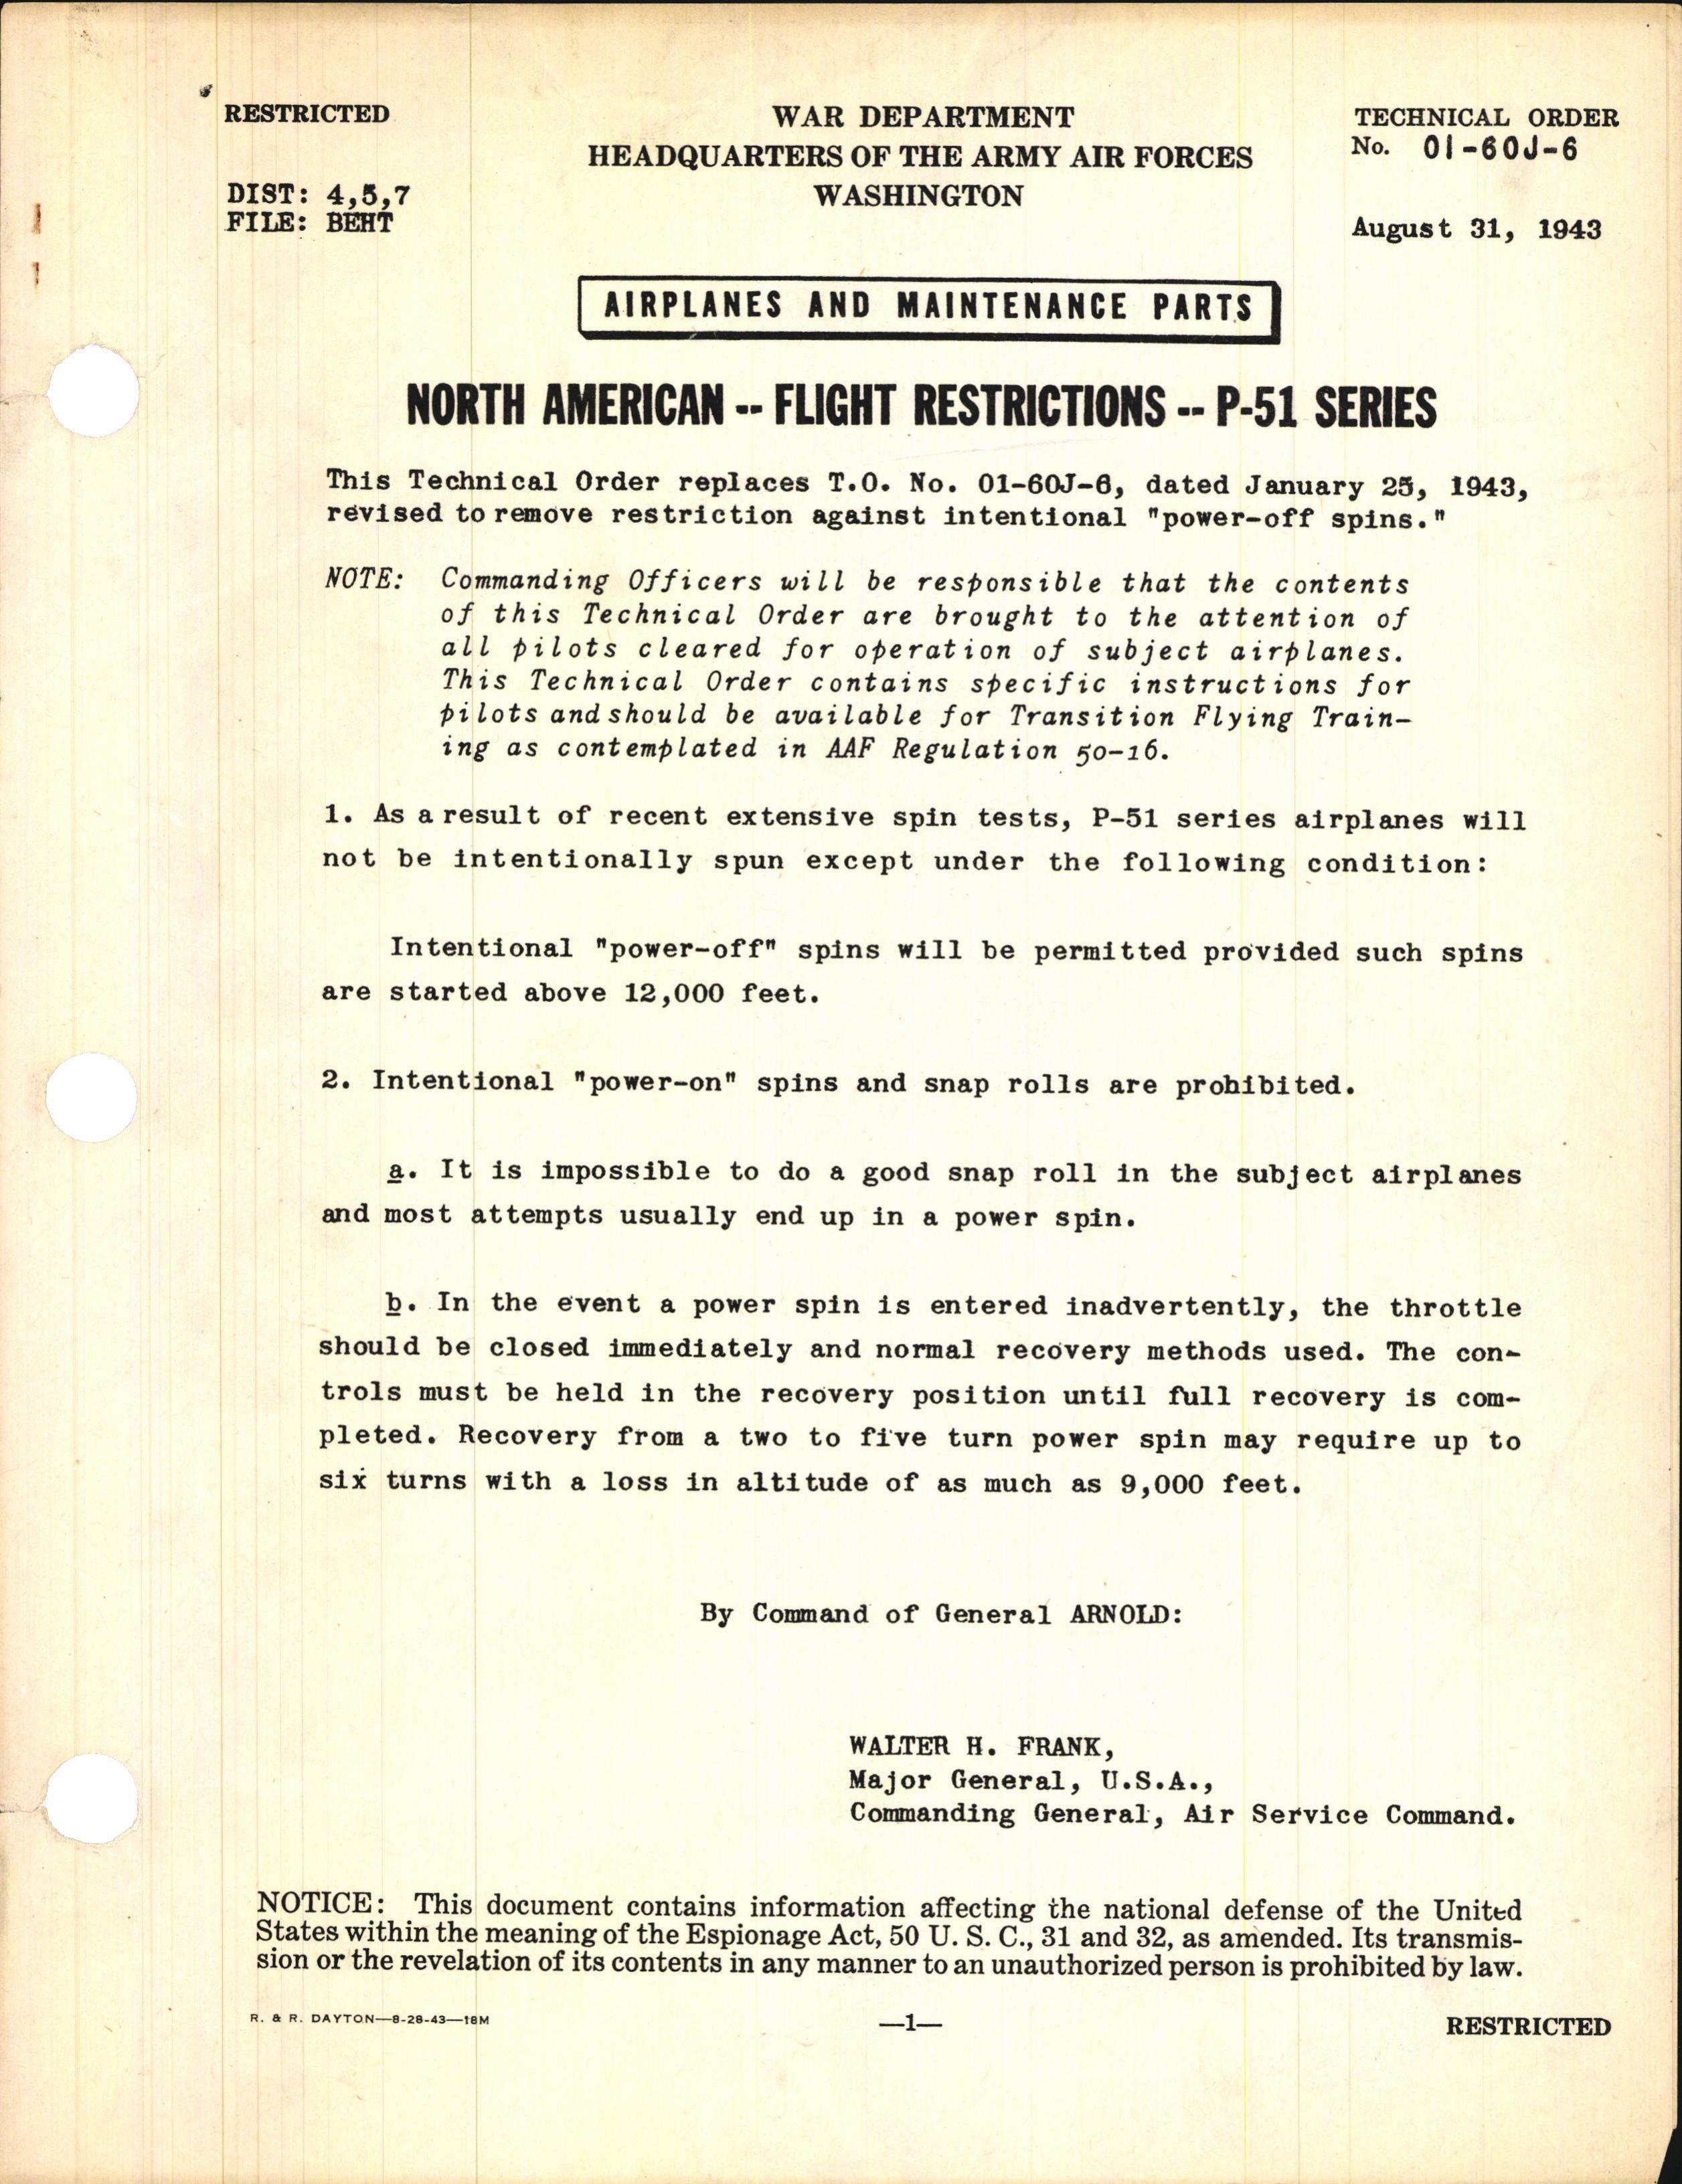 Sample page 1 from AirCorps Library document: Flight Restrictions for P-51 Series